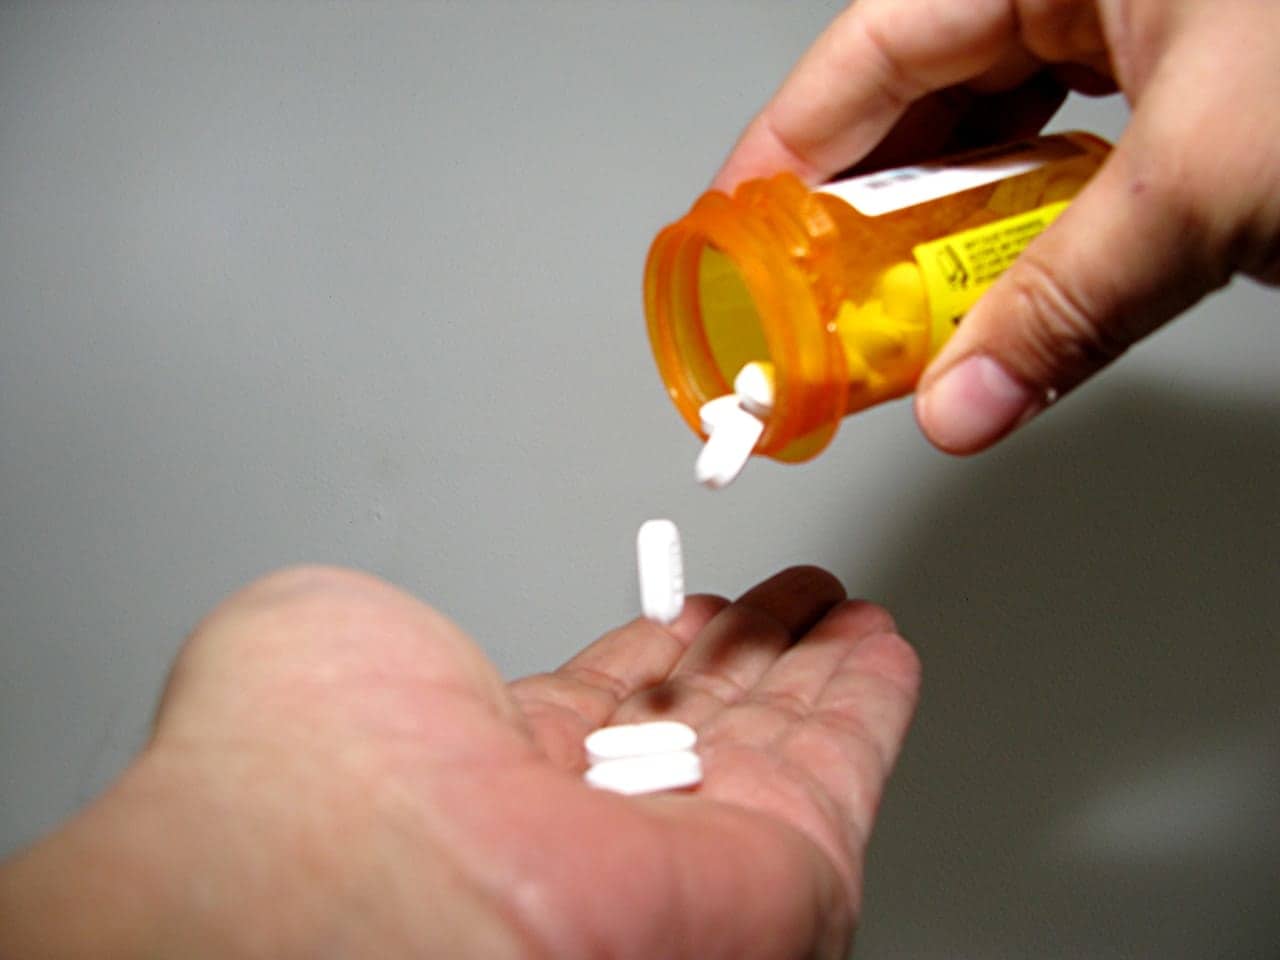 Norwalk has seen eight opioid overdoses over the past week with five deaths.